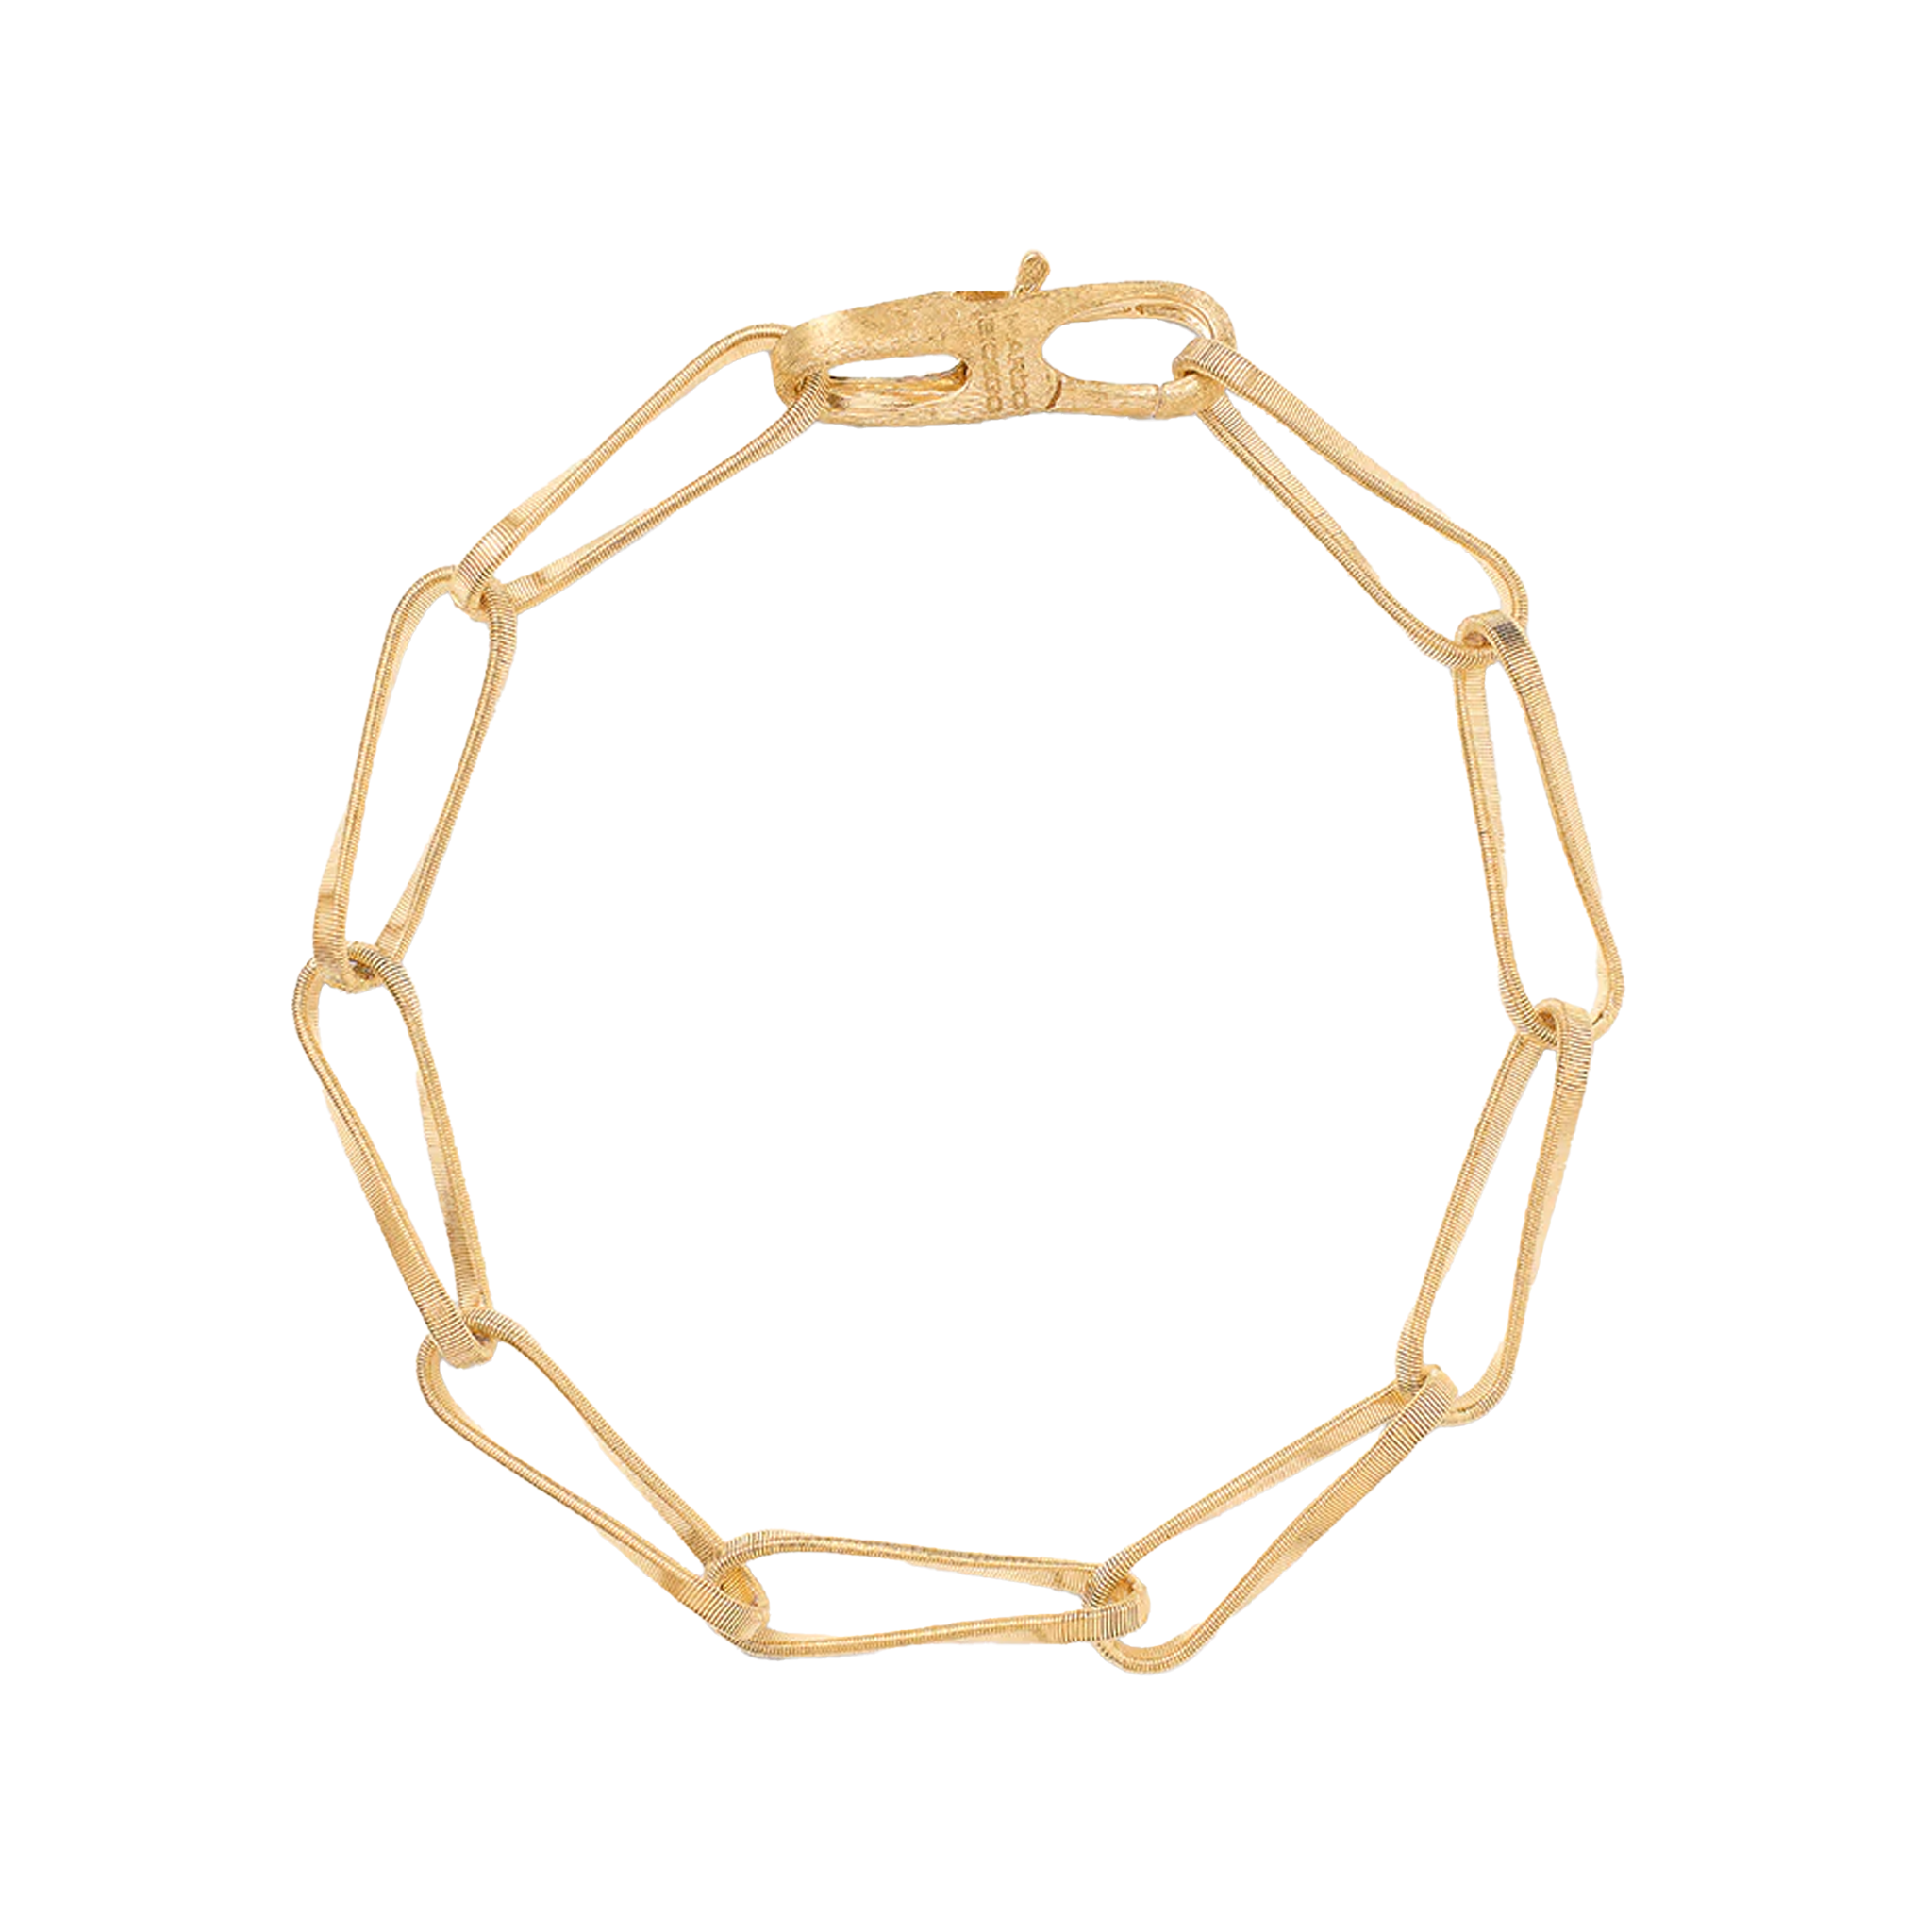 Marco Bicego 18K Yellow Gold Twisted Coil Bracelet